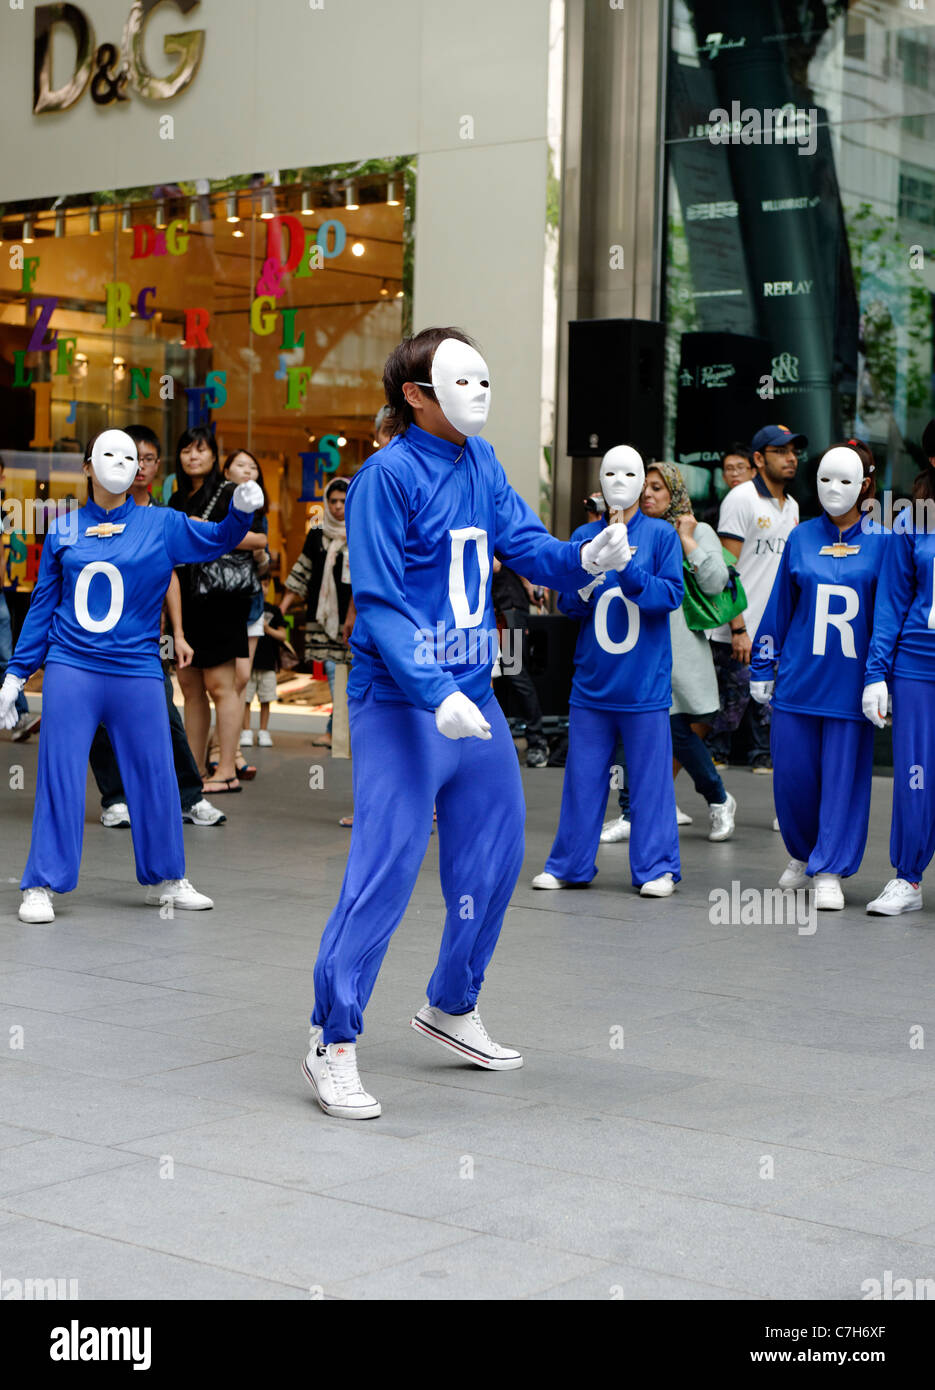 Dance troupe in blue track suits and white masks on Orchard Road, Singapore Stock Photo